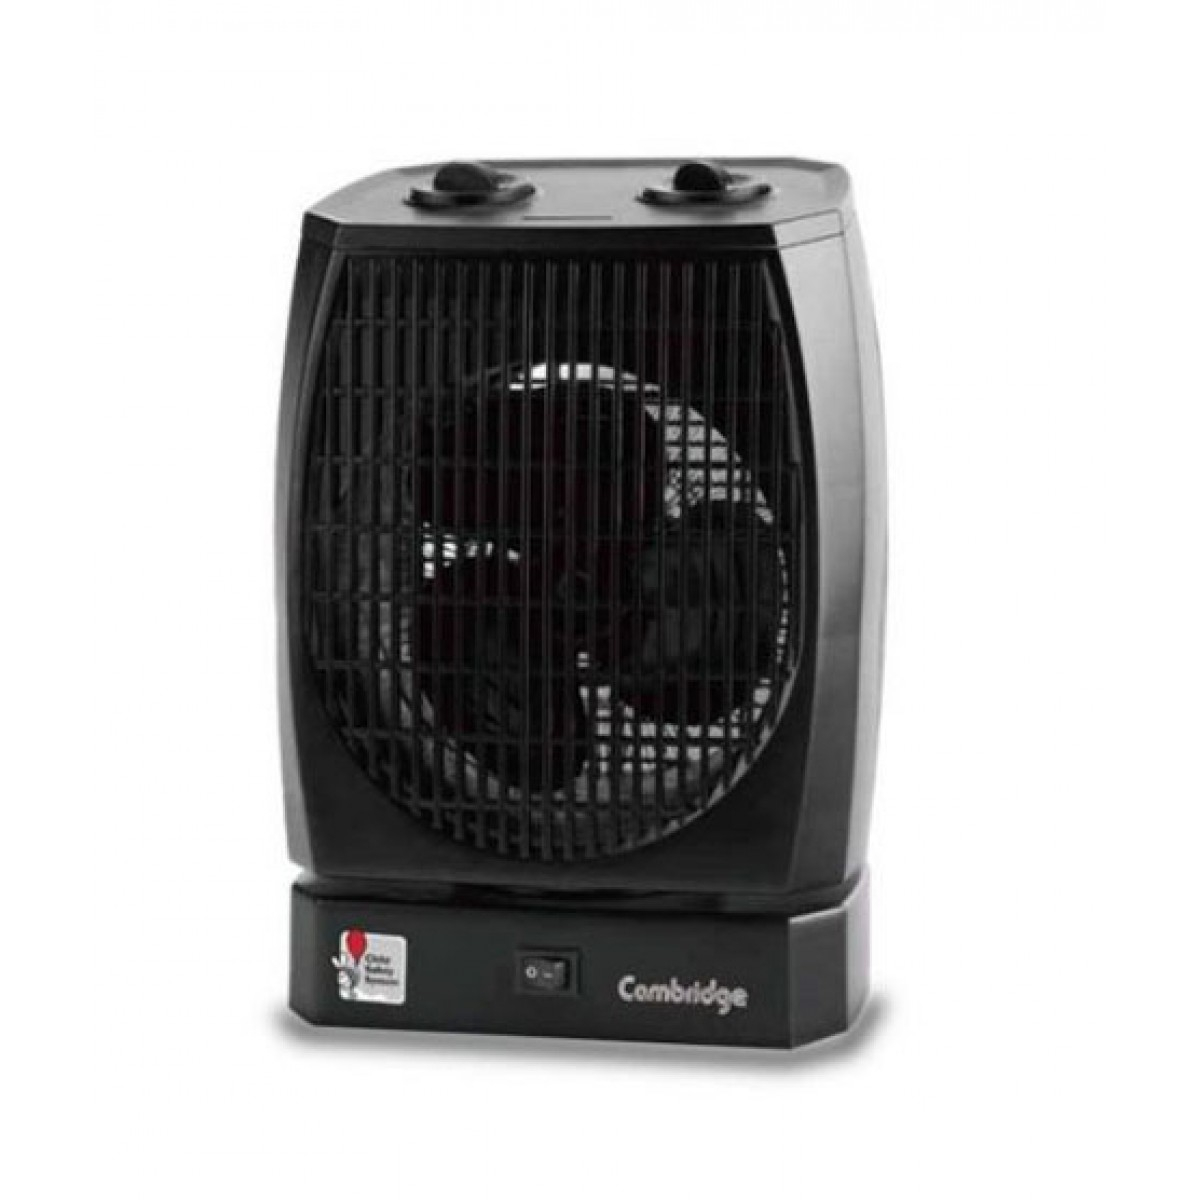 Cambridge Fh 0026 Fan Heater pertaining to dimensions 1200 X 1200